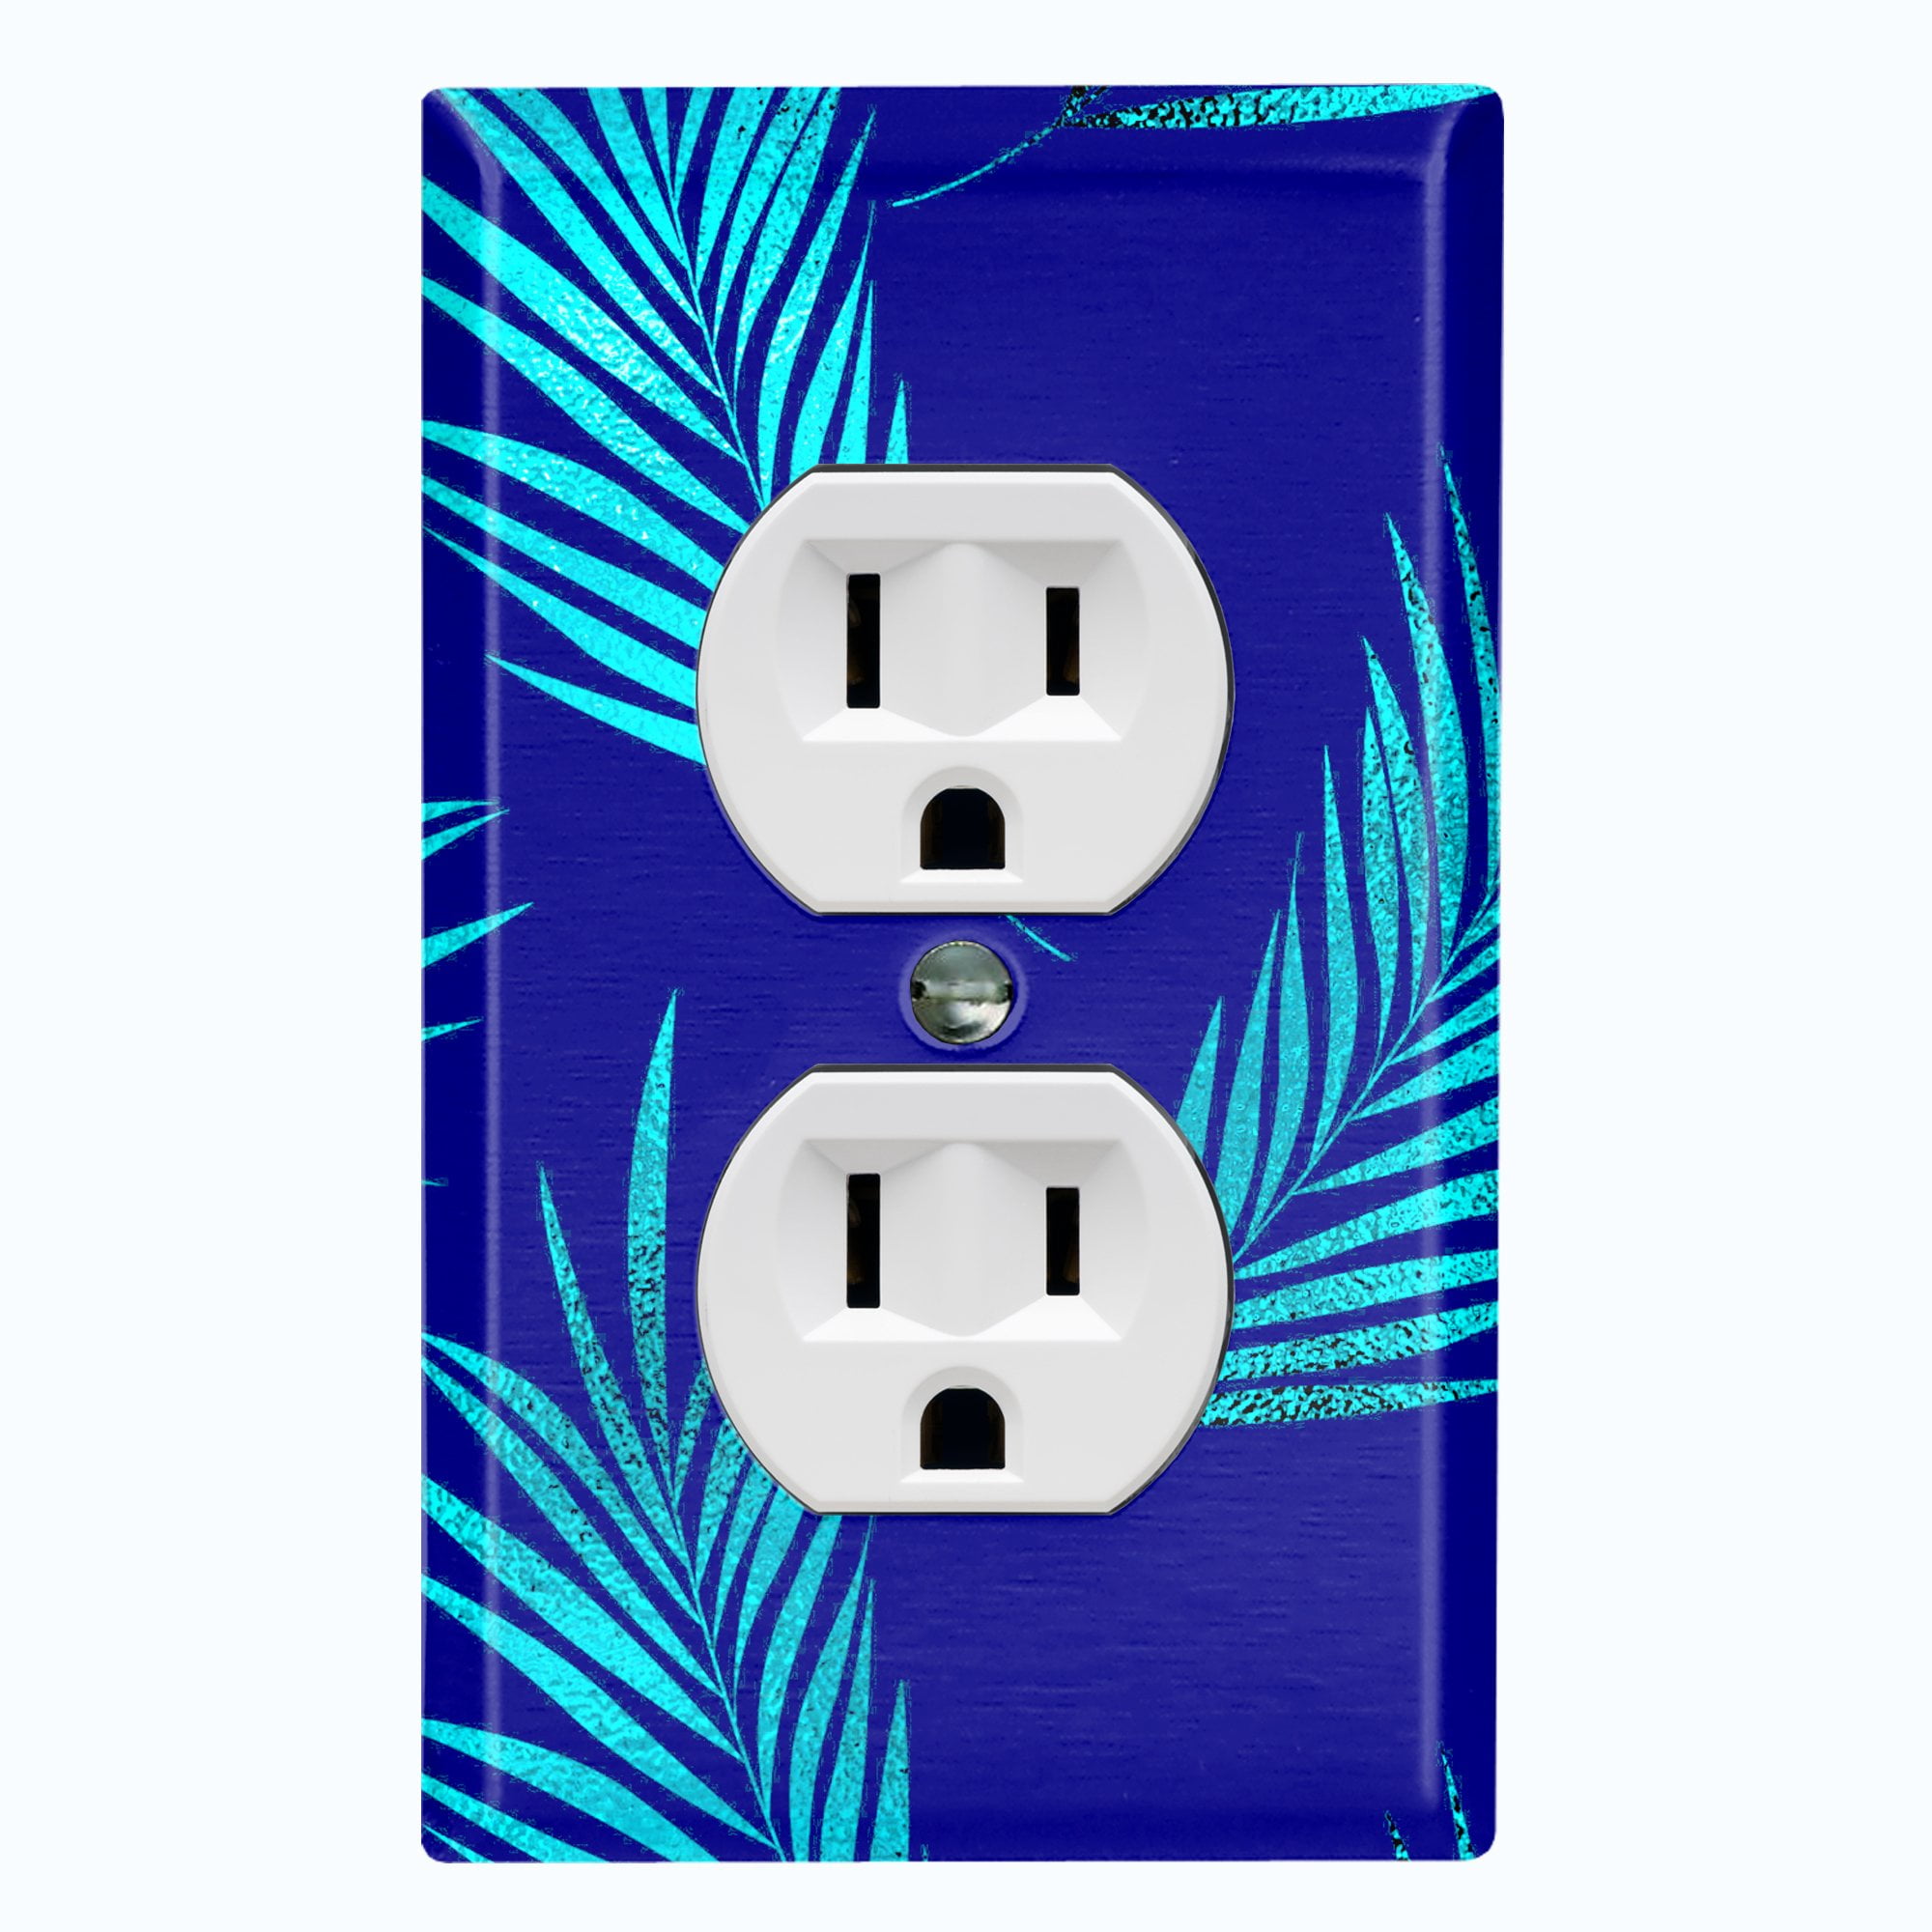 Ocean Waves Palm Trees Neon Mountain Wall Plate Double Gang Rocker Light Switch Plate Cover Wall Plate Decorator Outlet Cover for Living Room Bedroom Kitchen